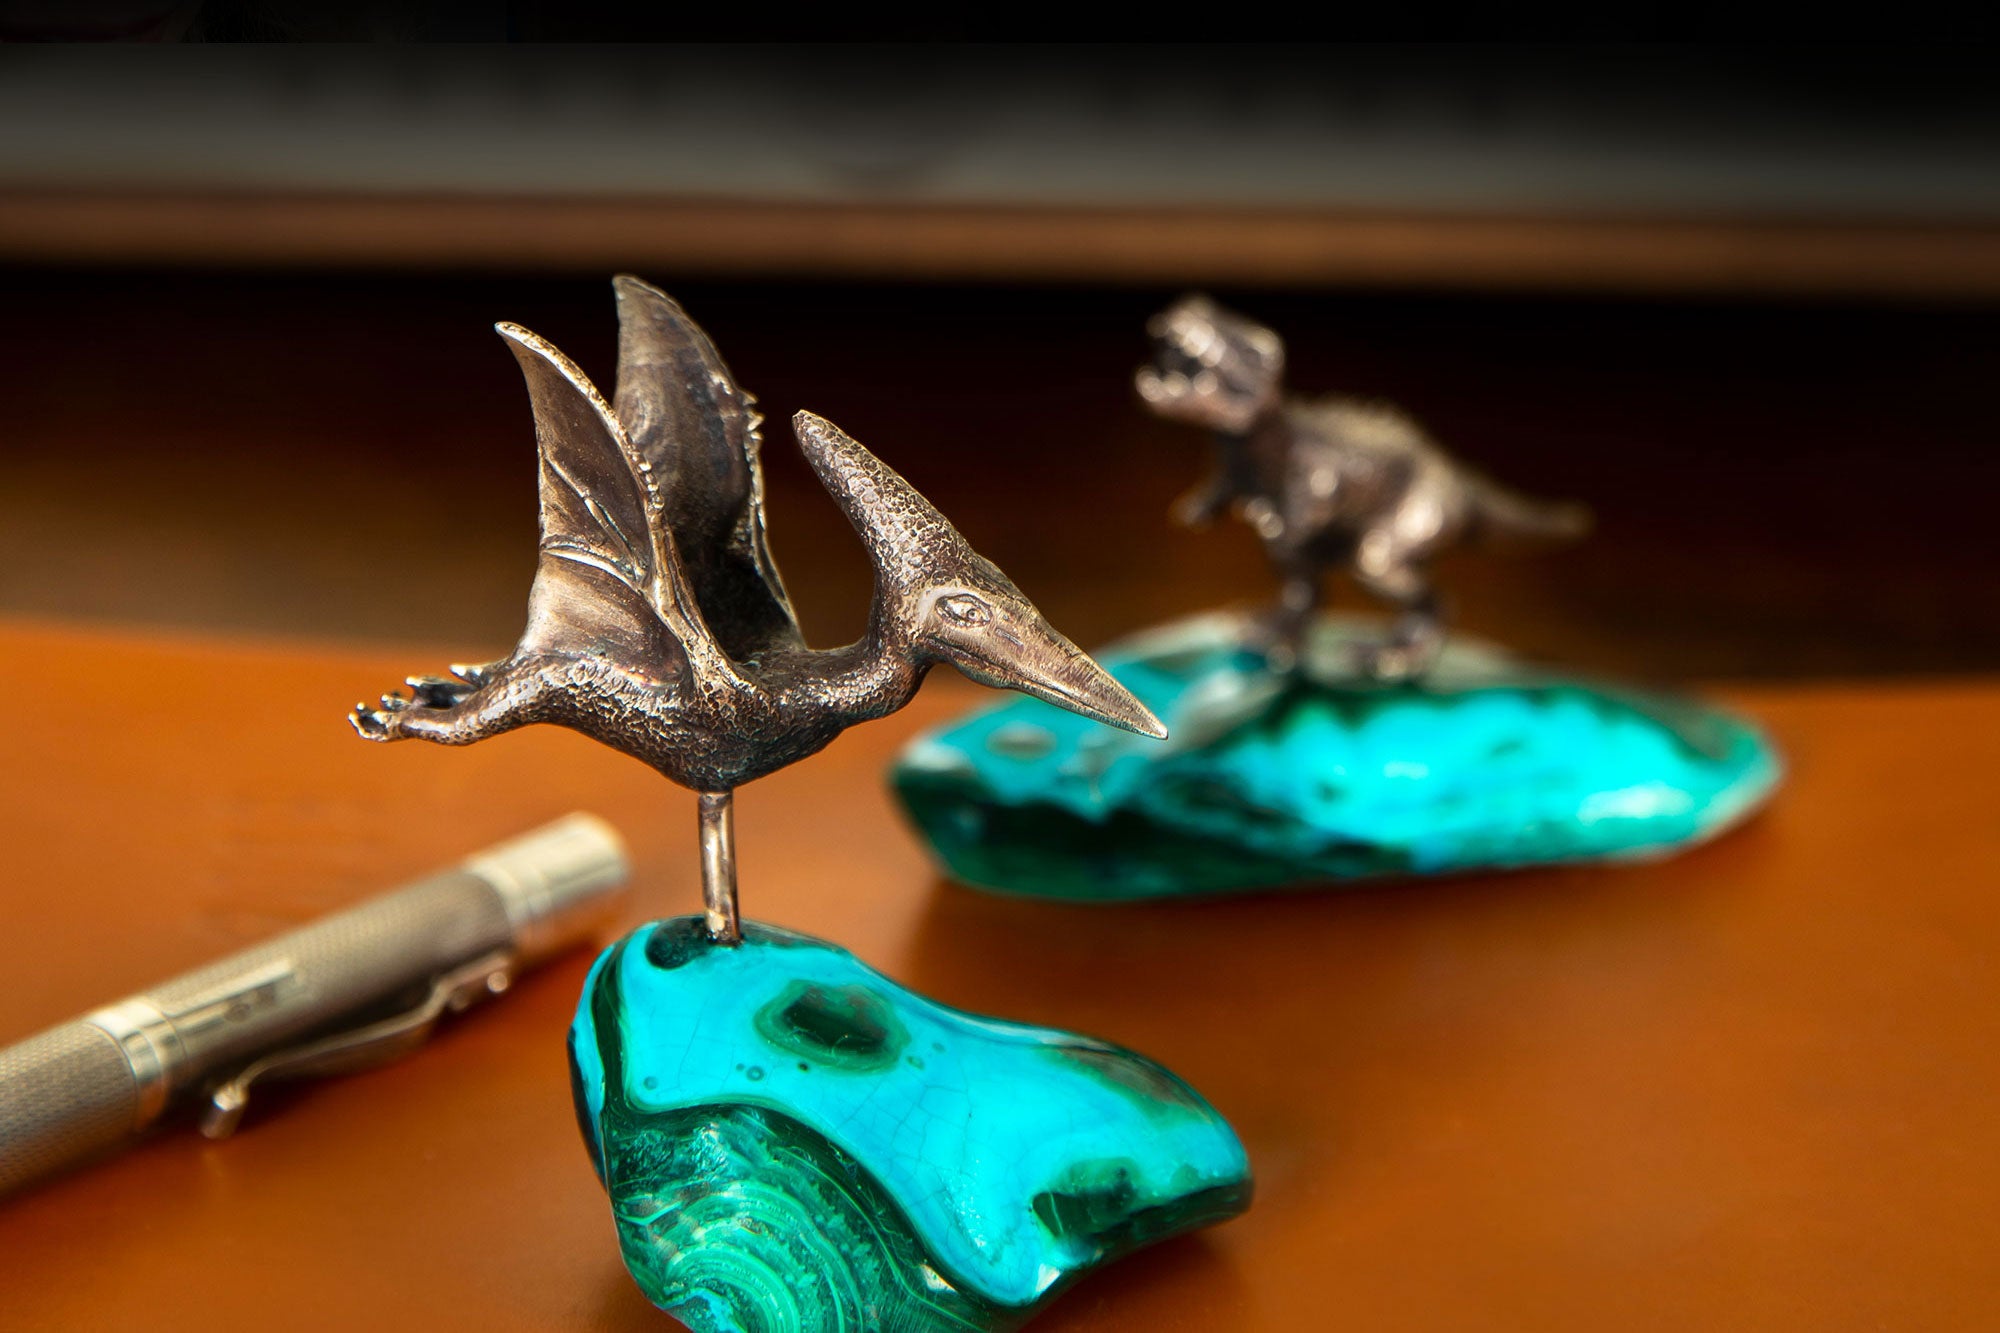 Limited-Edition Desk Ornaments